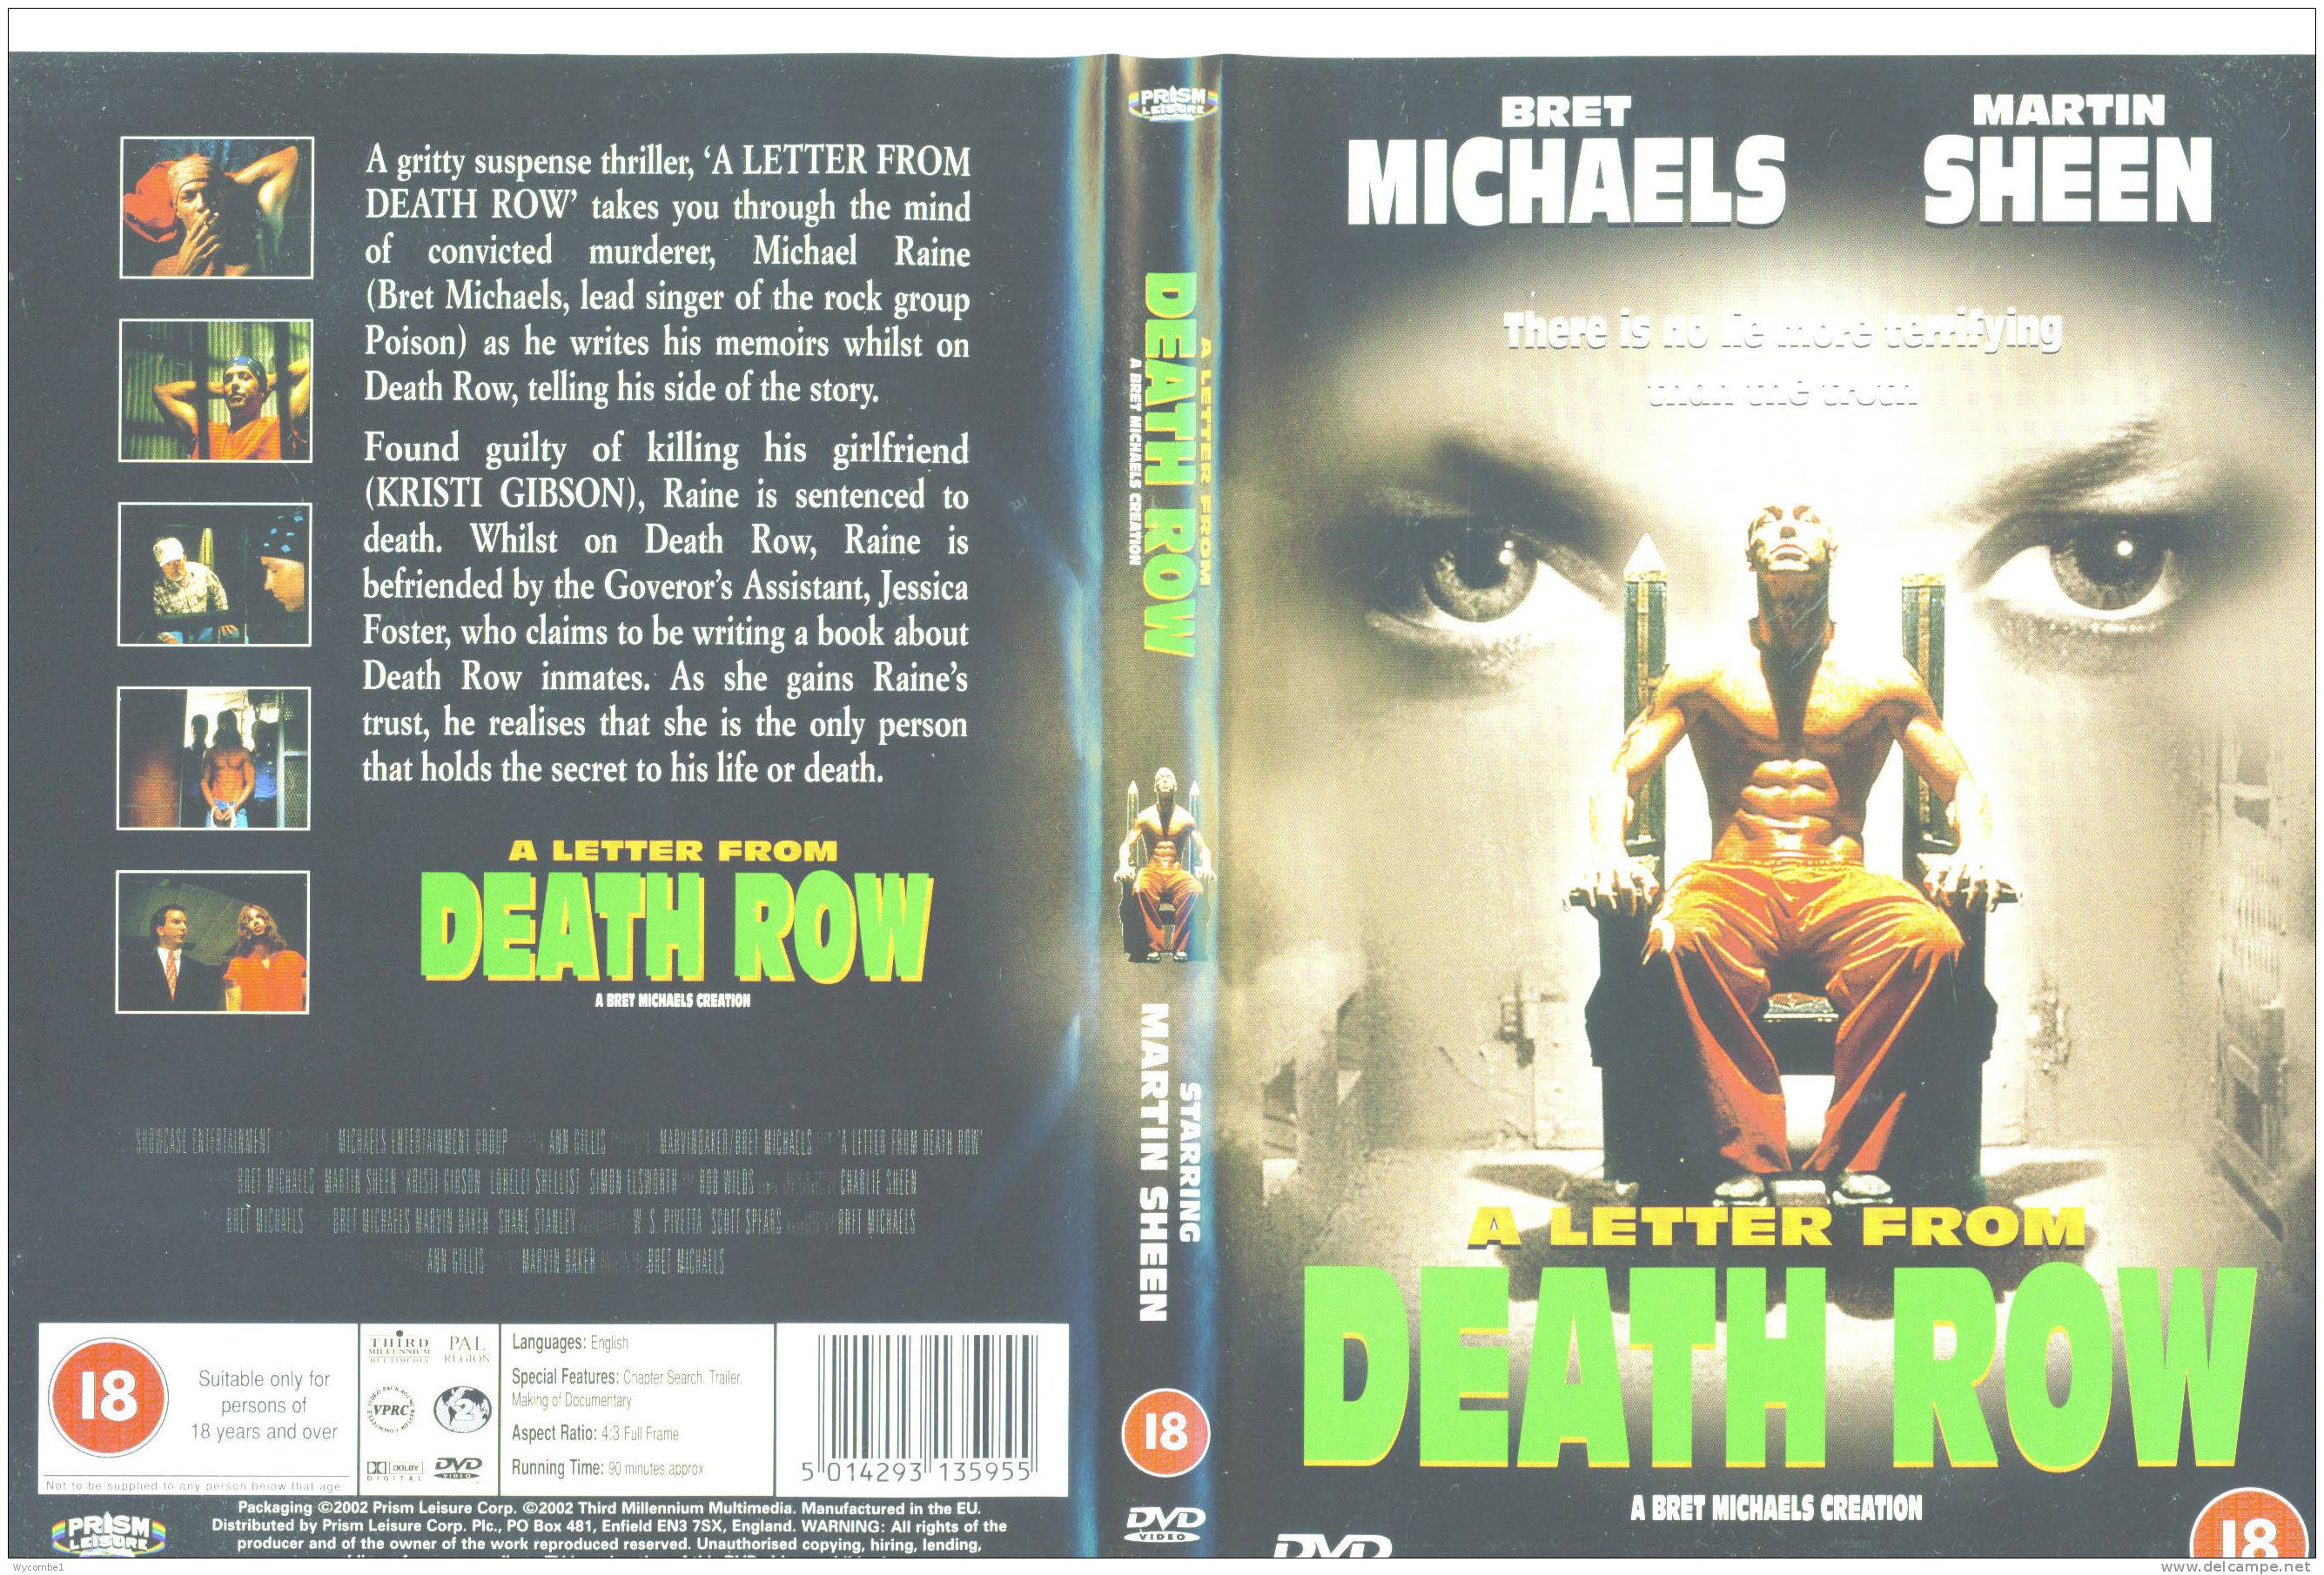 A LETTER FROM DEATH ROW - Martin Sheen (Details In Scan) - Drama